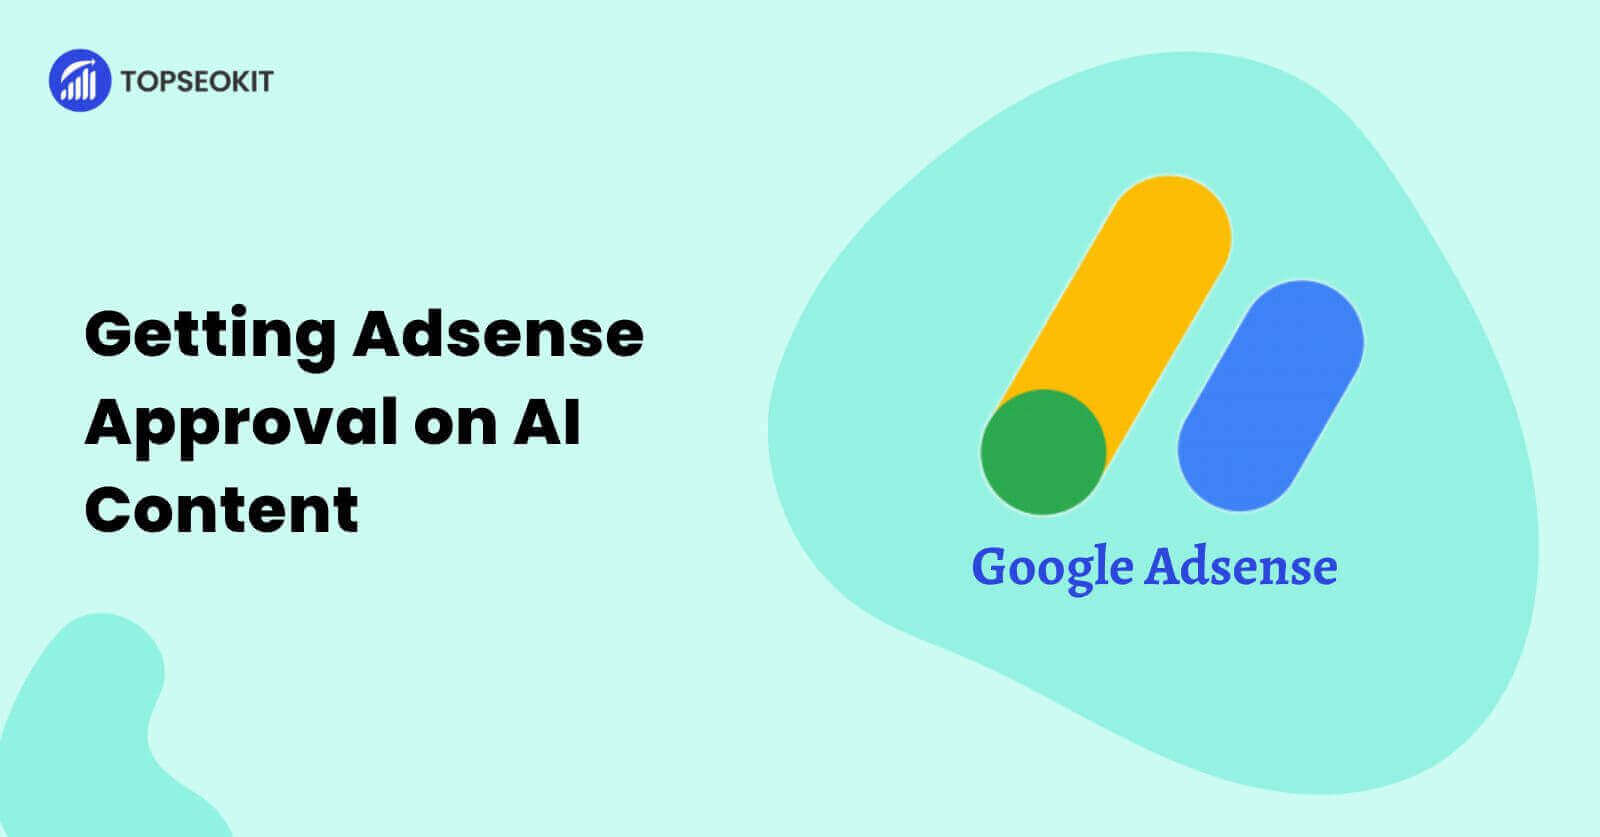 Can You Get Adsense Approval On AI Content?